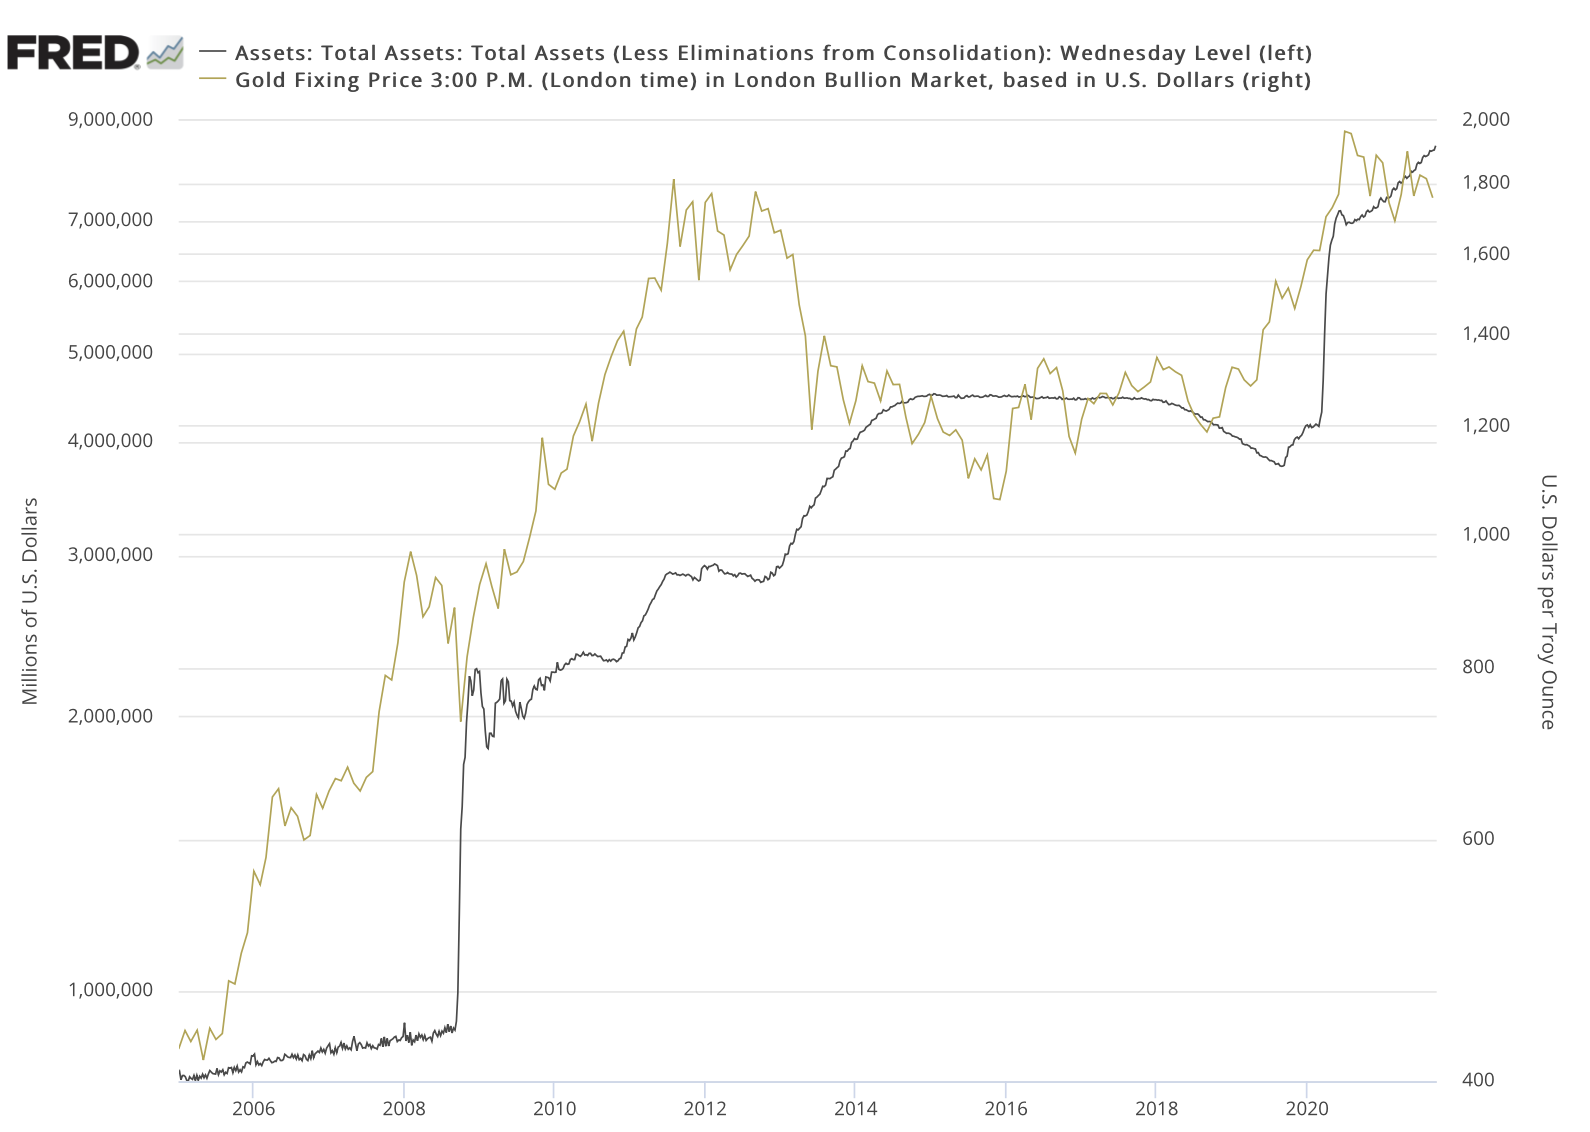 overlay line chart showing the growth in the Fed's balance sheet and the gold price 2005 to present